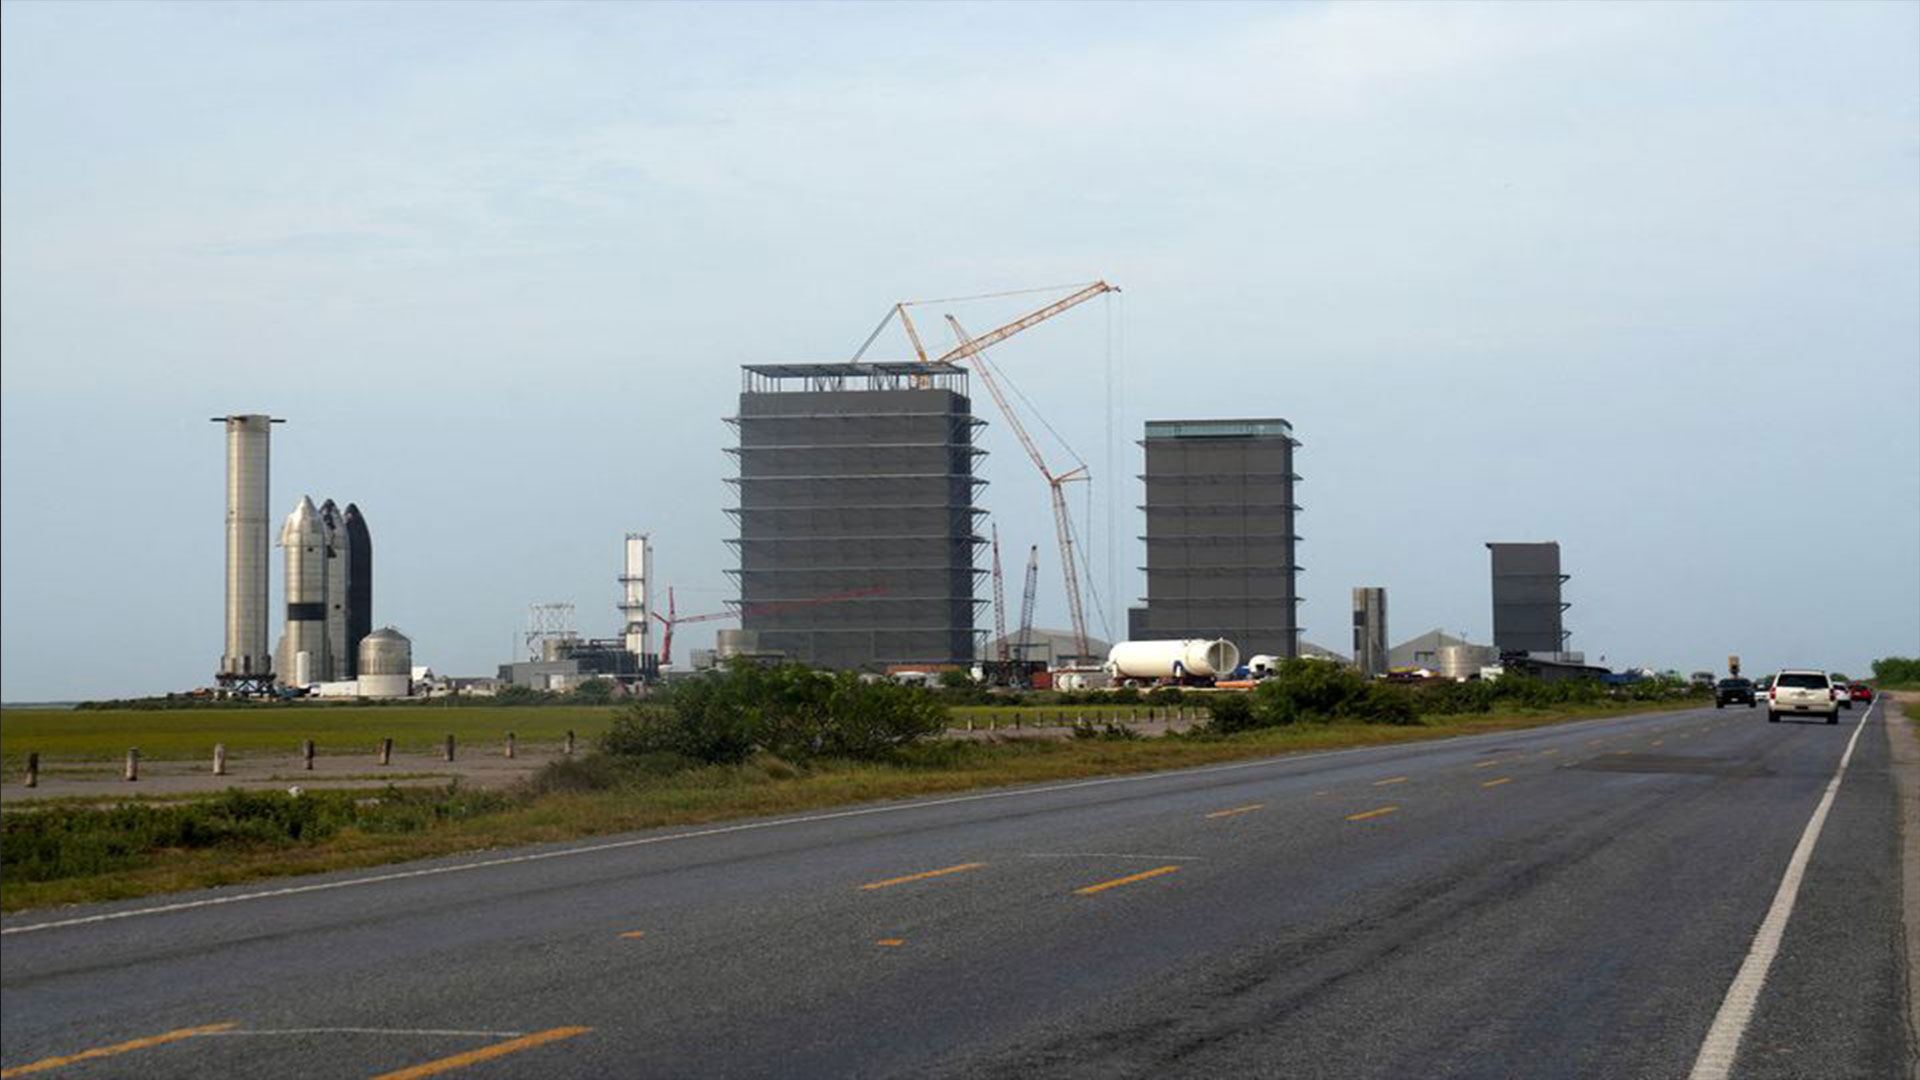  Starship prototypes are pictured at the SpaceX South Texas launch site in Brownsville, Texas, U.S., May 22, 2022. Picture taken May 22, 2022. REUTERS/Veronica G. Cardenas/File Photo